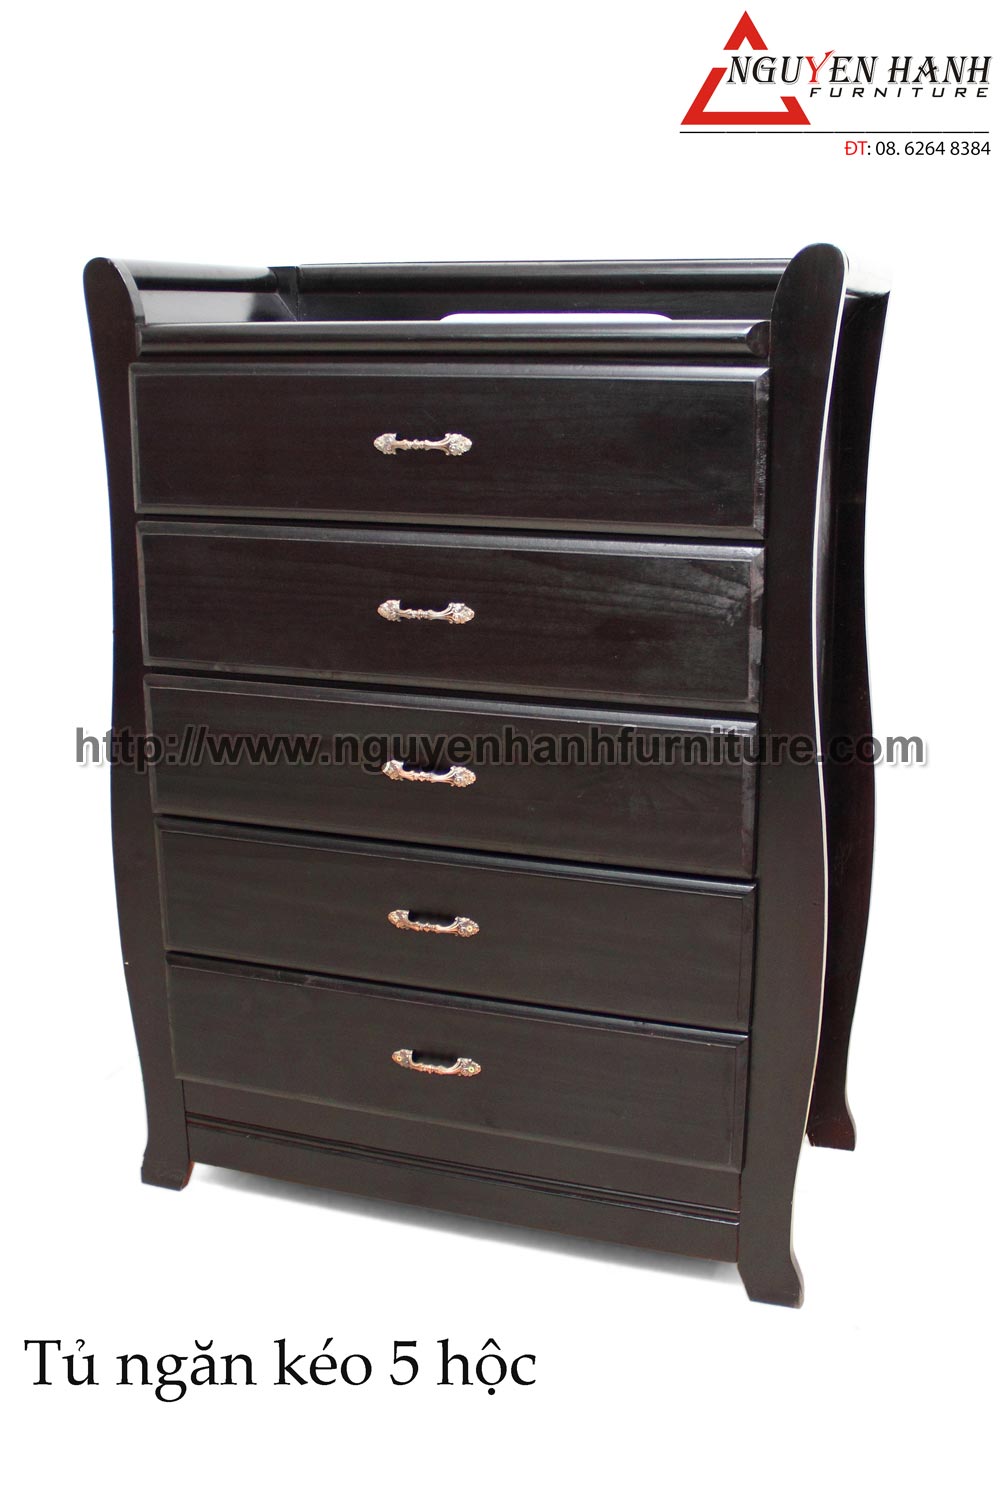 Name product: 5-drawer Cabinet- Dimensions: 44 x 90 x 123cm - Description: Rubber wood, MDF